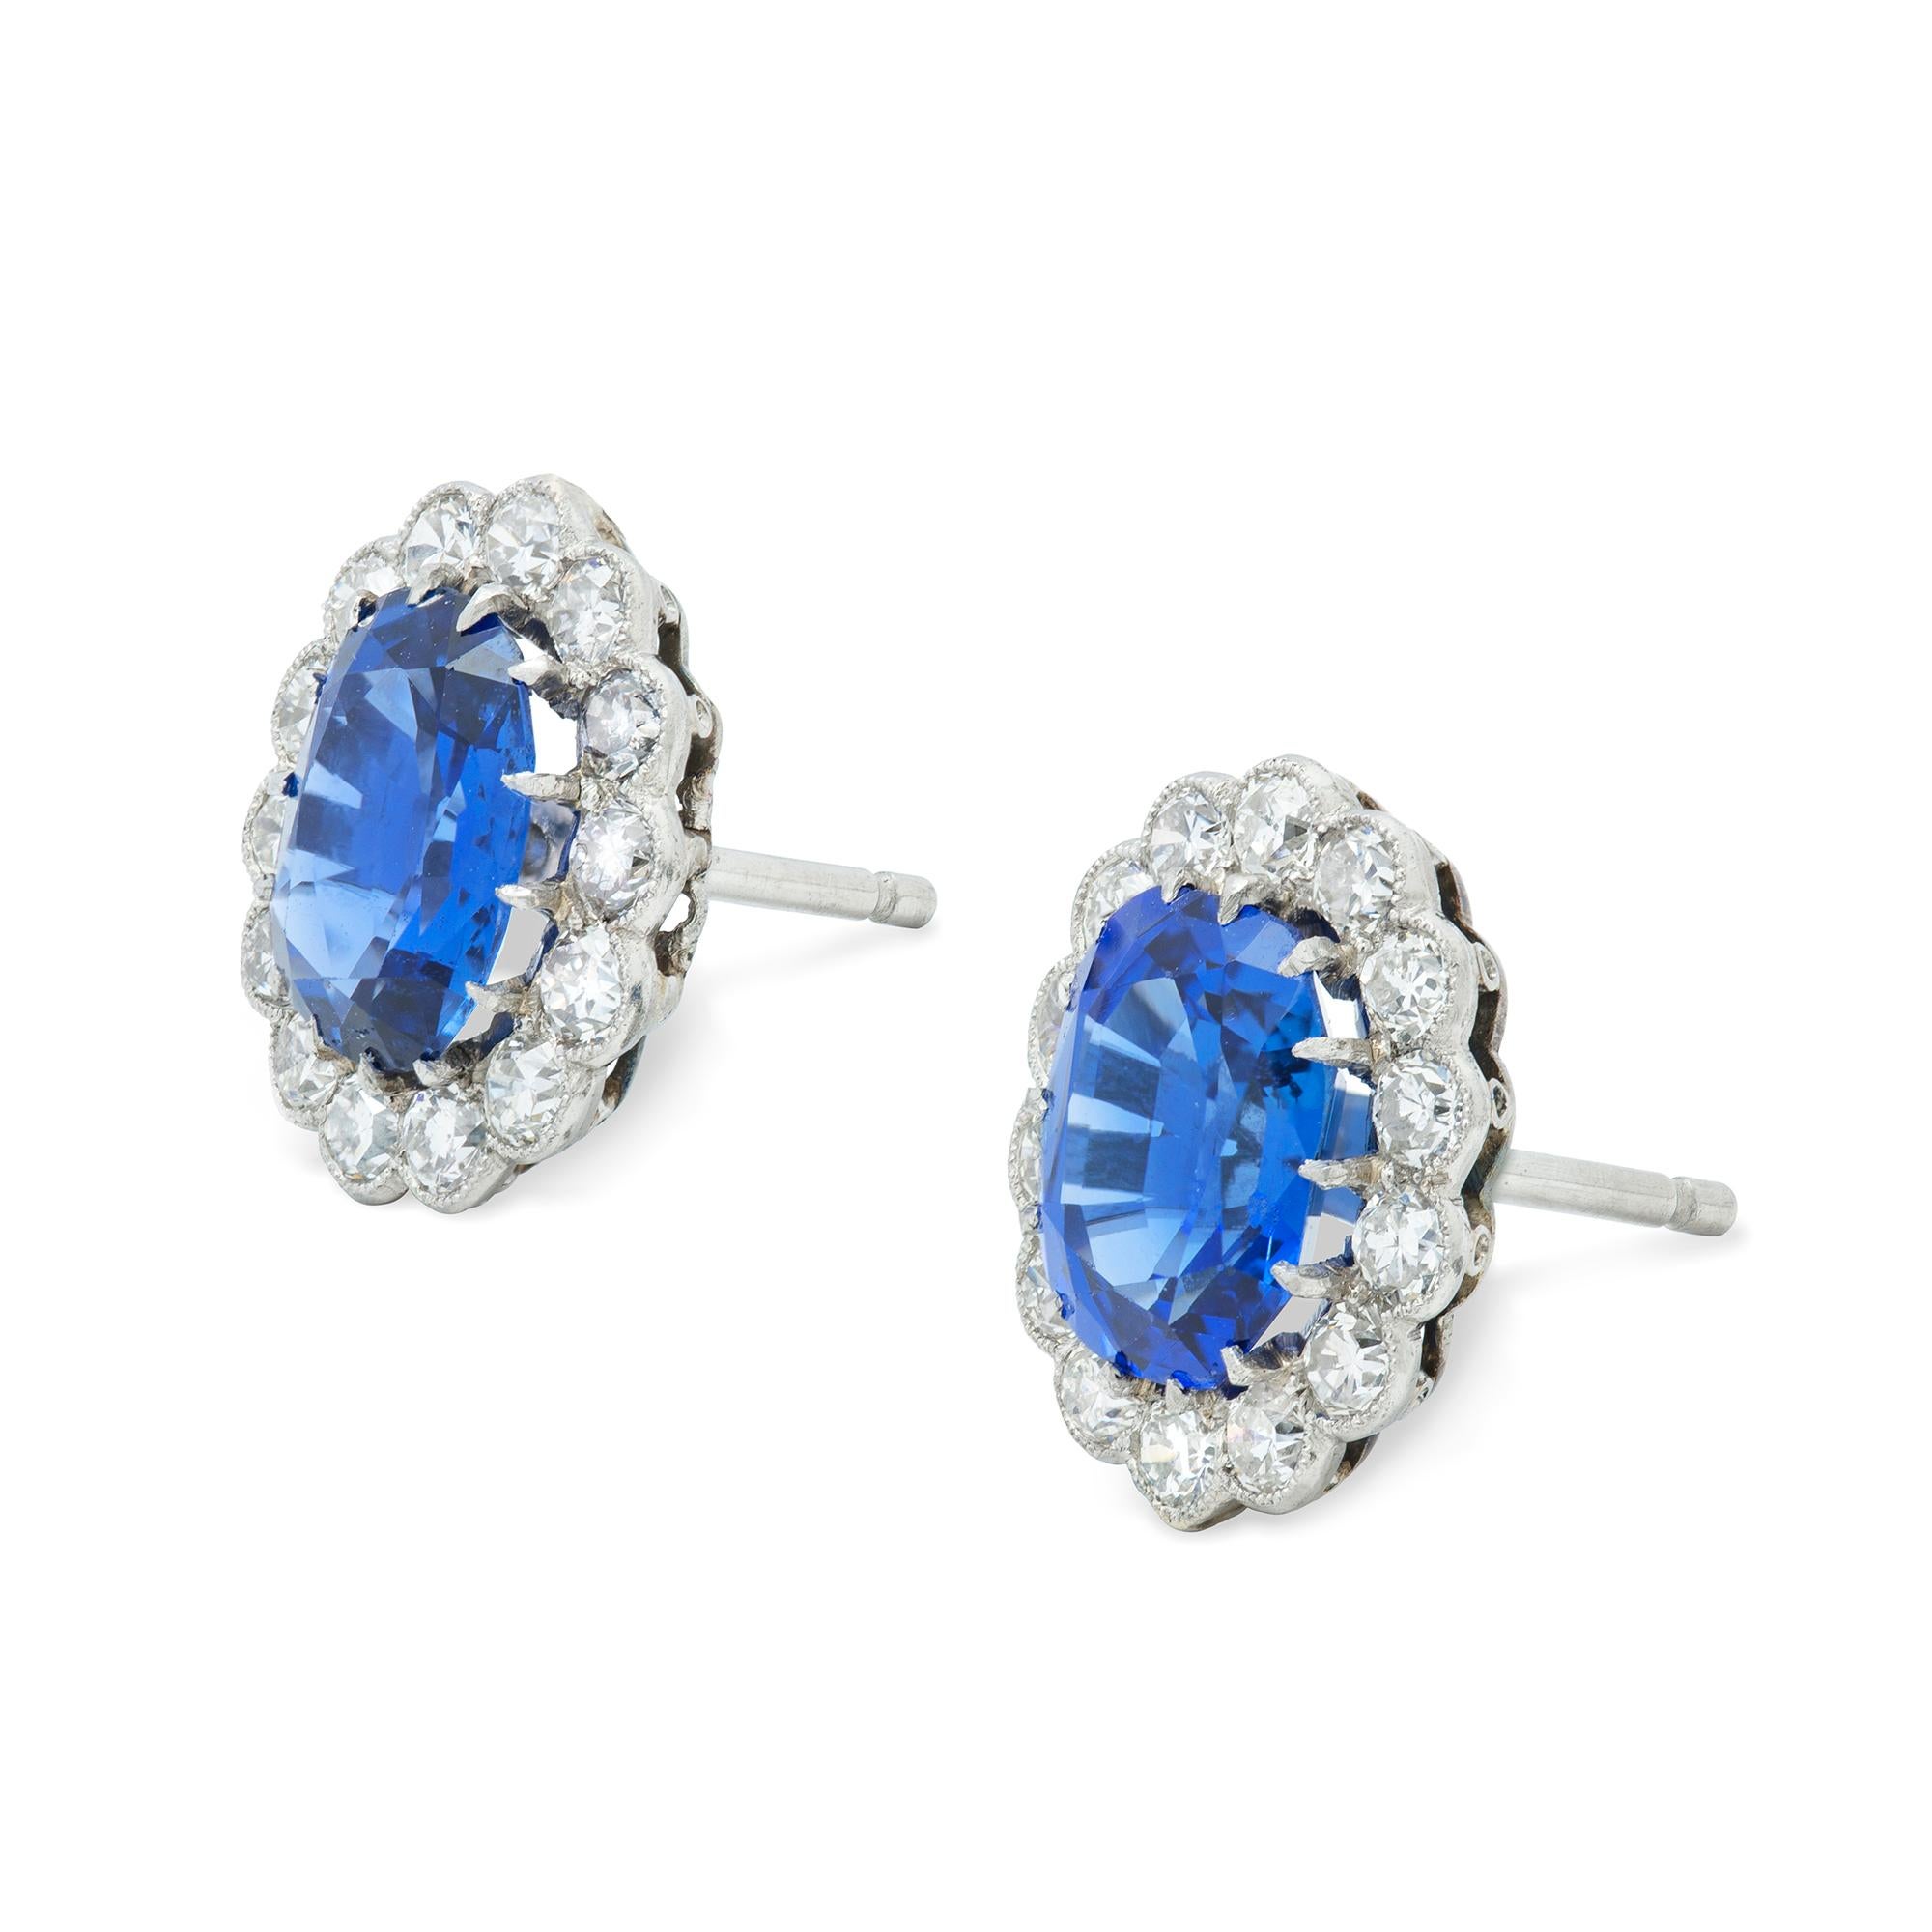 A pair of George V sapphire and diamond cluster earrings, each earring set with an oval-shaped faceted sapphire, total sapphire weight 3.66 carats, accompanied by GCS Report stating to be of Burmese origin with no indication of heat treatment,